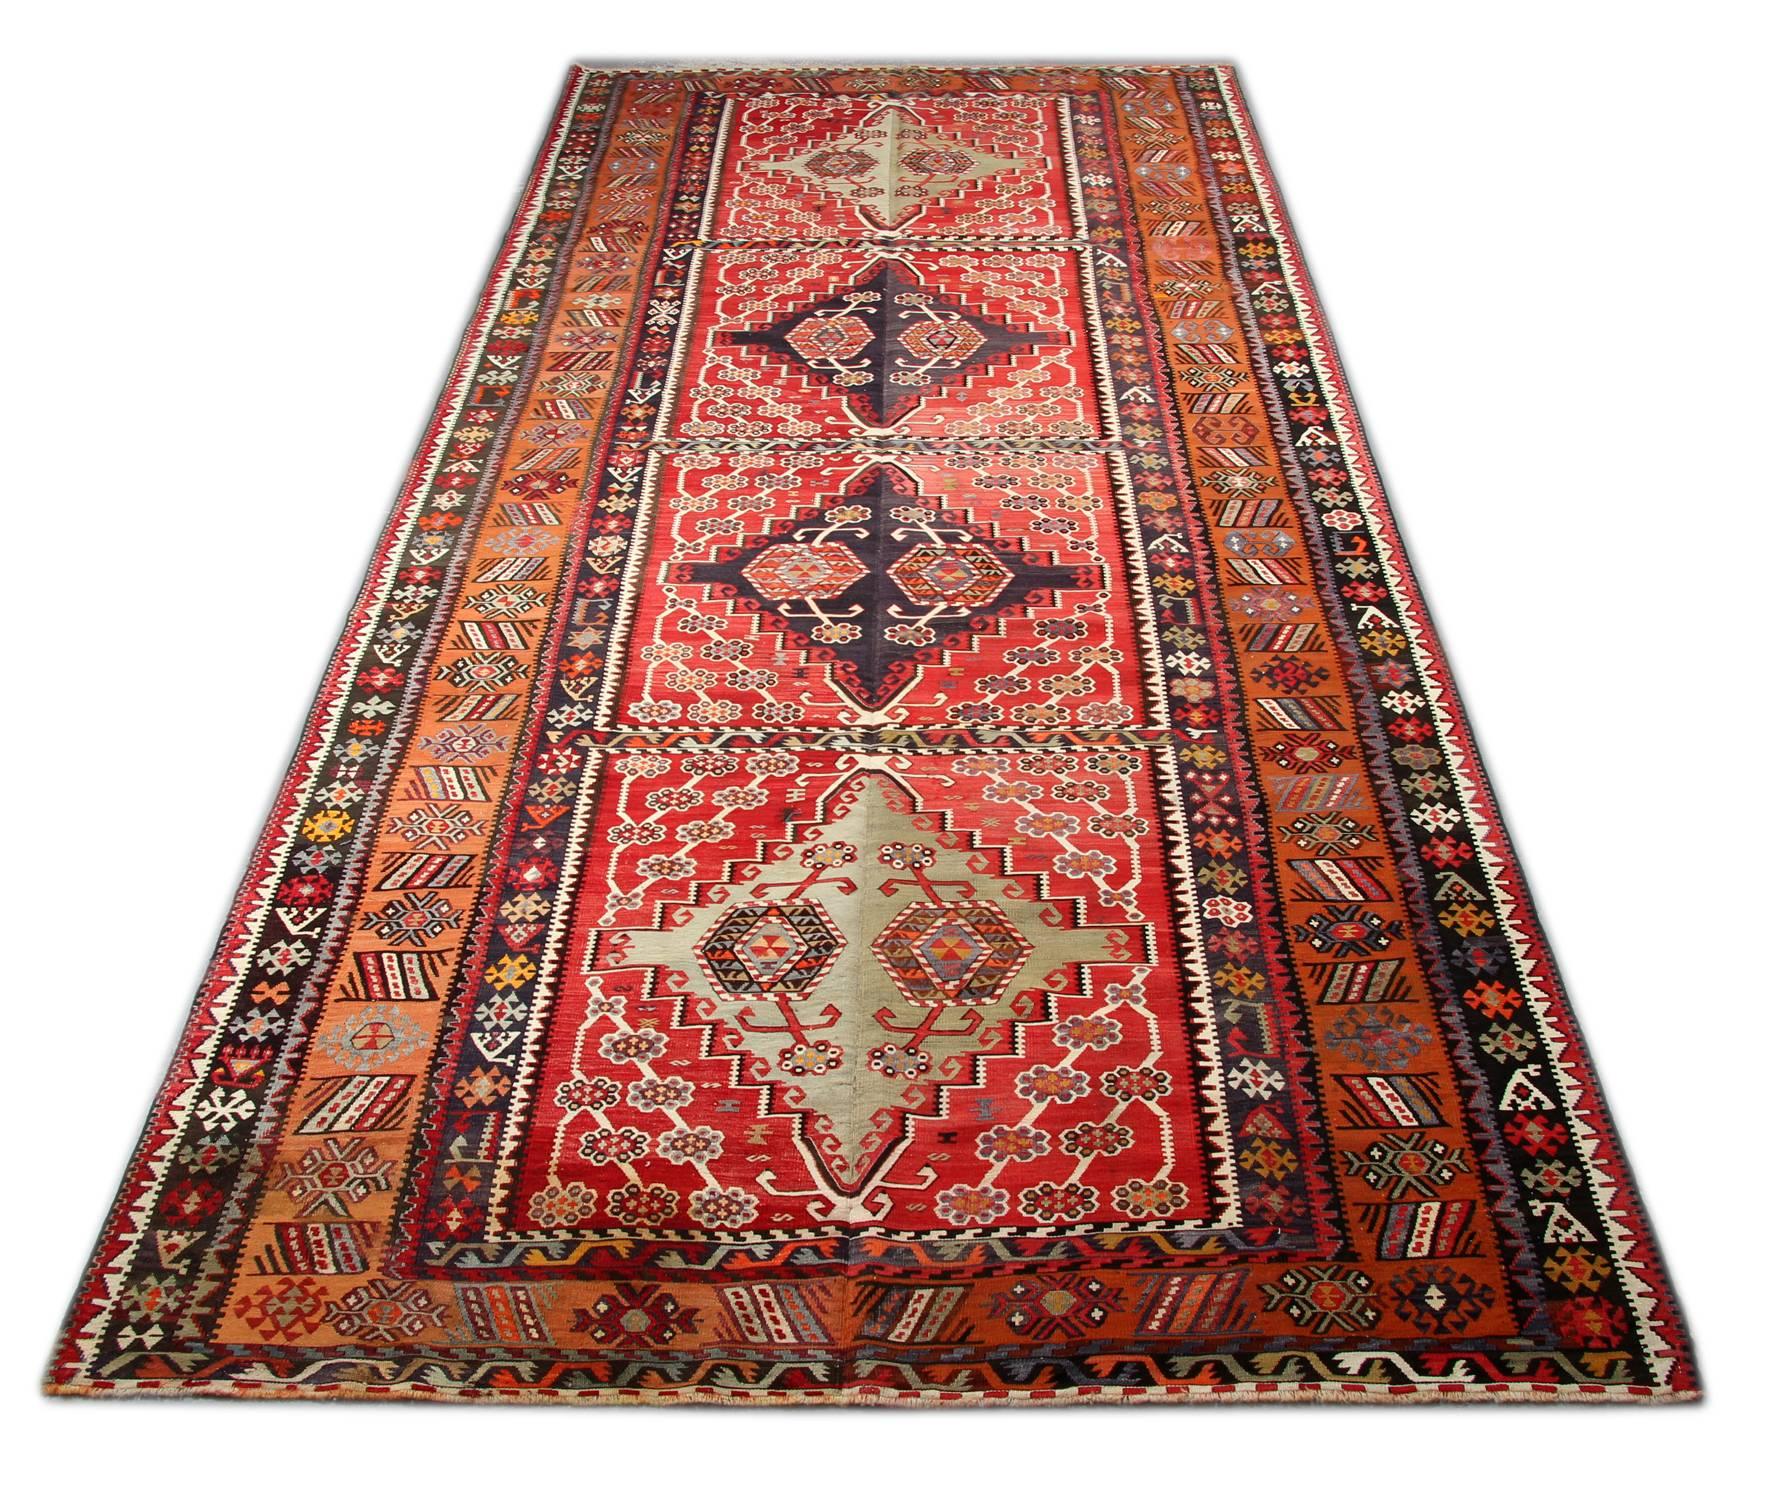 This floor rug is a Turkish carpet rug has woven by very skilled weavers in Turkey, who used the highest quality wool and cotton. The flat-weave rug has light red, rust, grey-green, white, gold, yellow and dark brown colors. The rust-red background